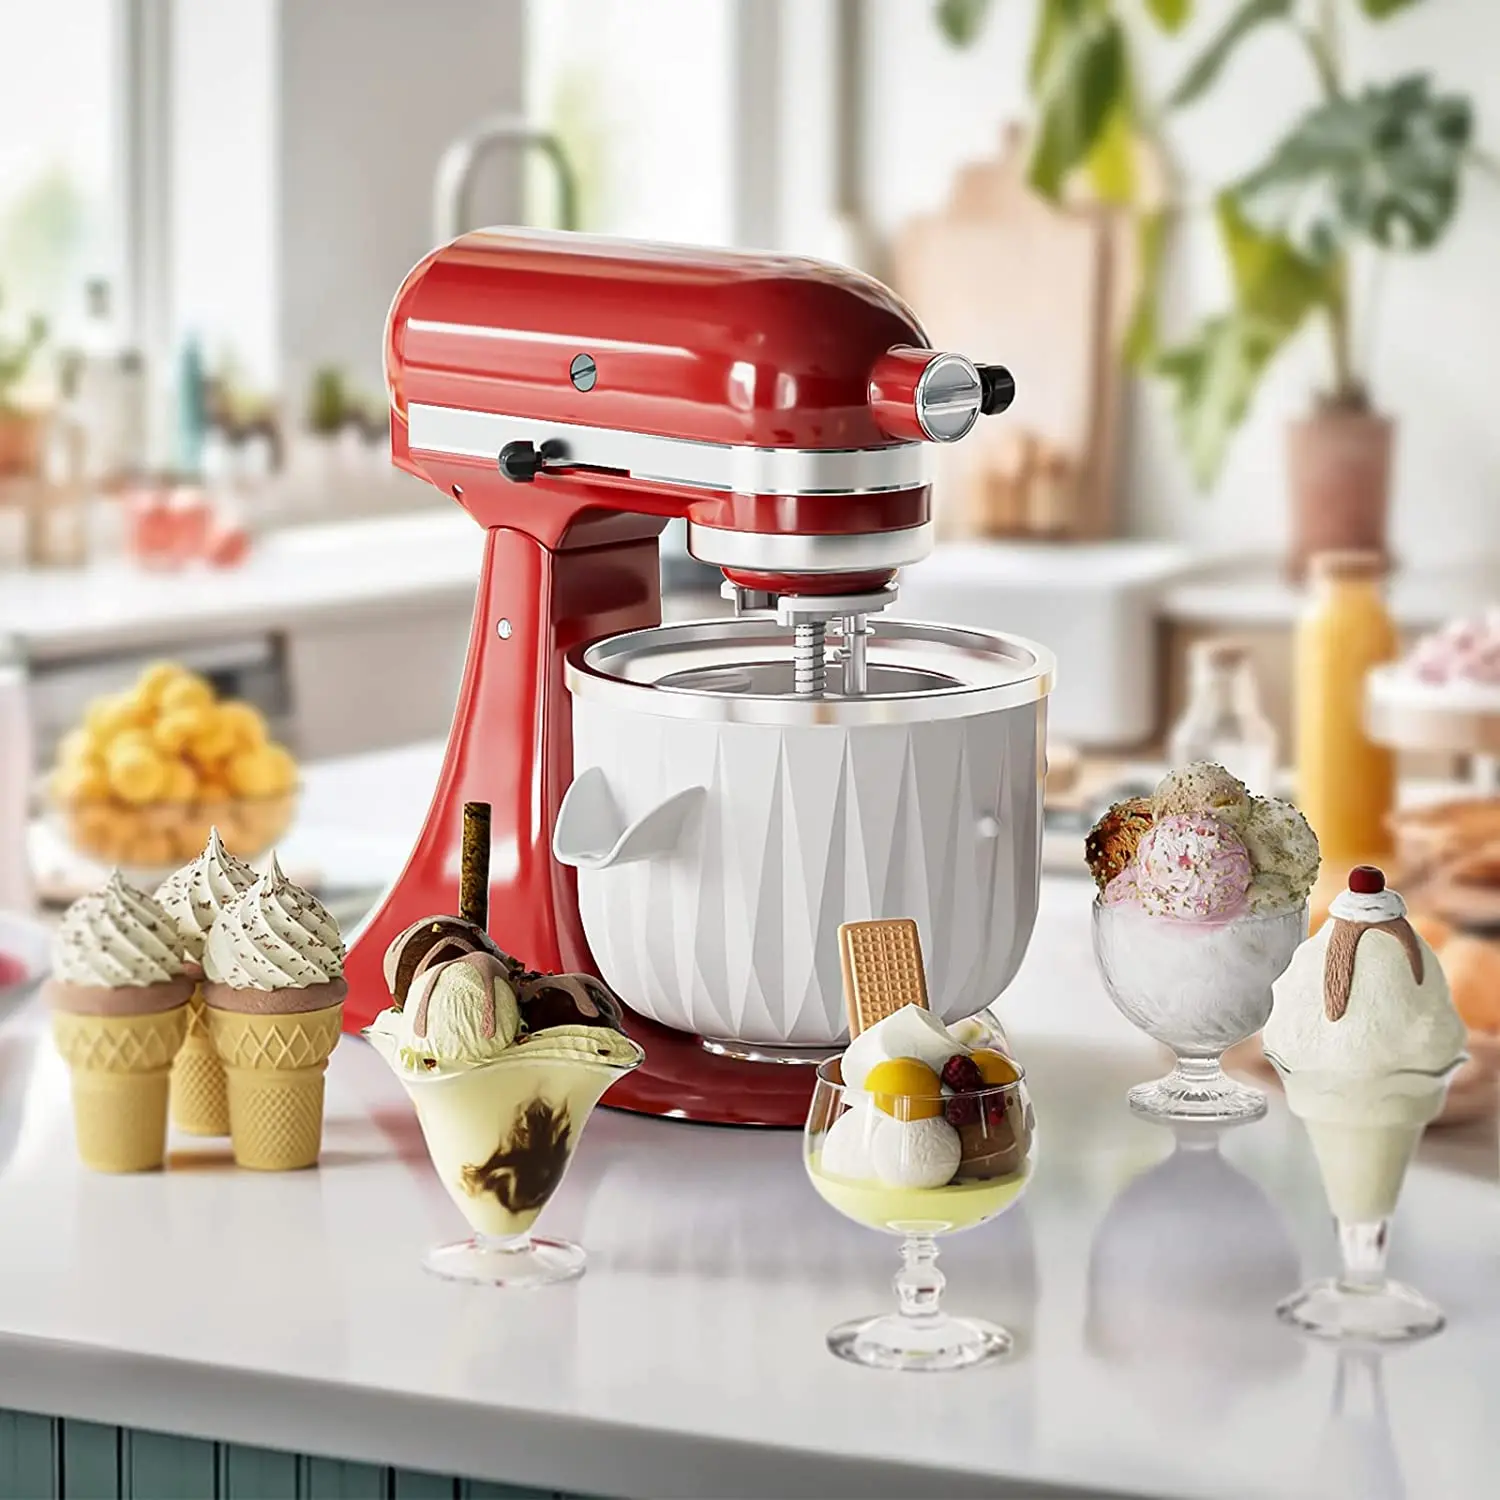 https://ae01.alicdn.com/kf/S8273a3b864054634a2975851a1e0f3696/Ice-Cream-Maker-Attachment-for-KitchenAid-Stand-Mixer-Compatible-with-KitchenAid-4-5-Qt-and-Ice.jpg